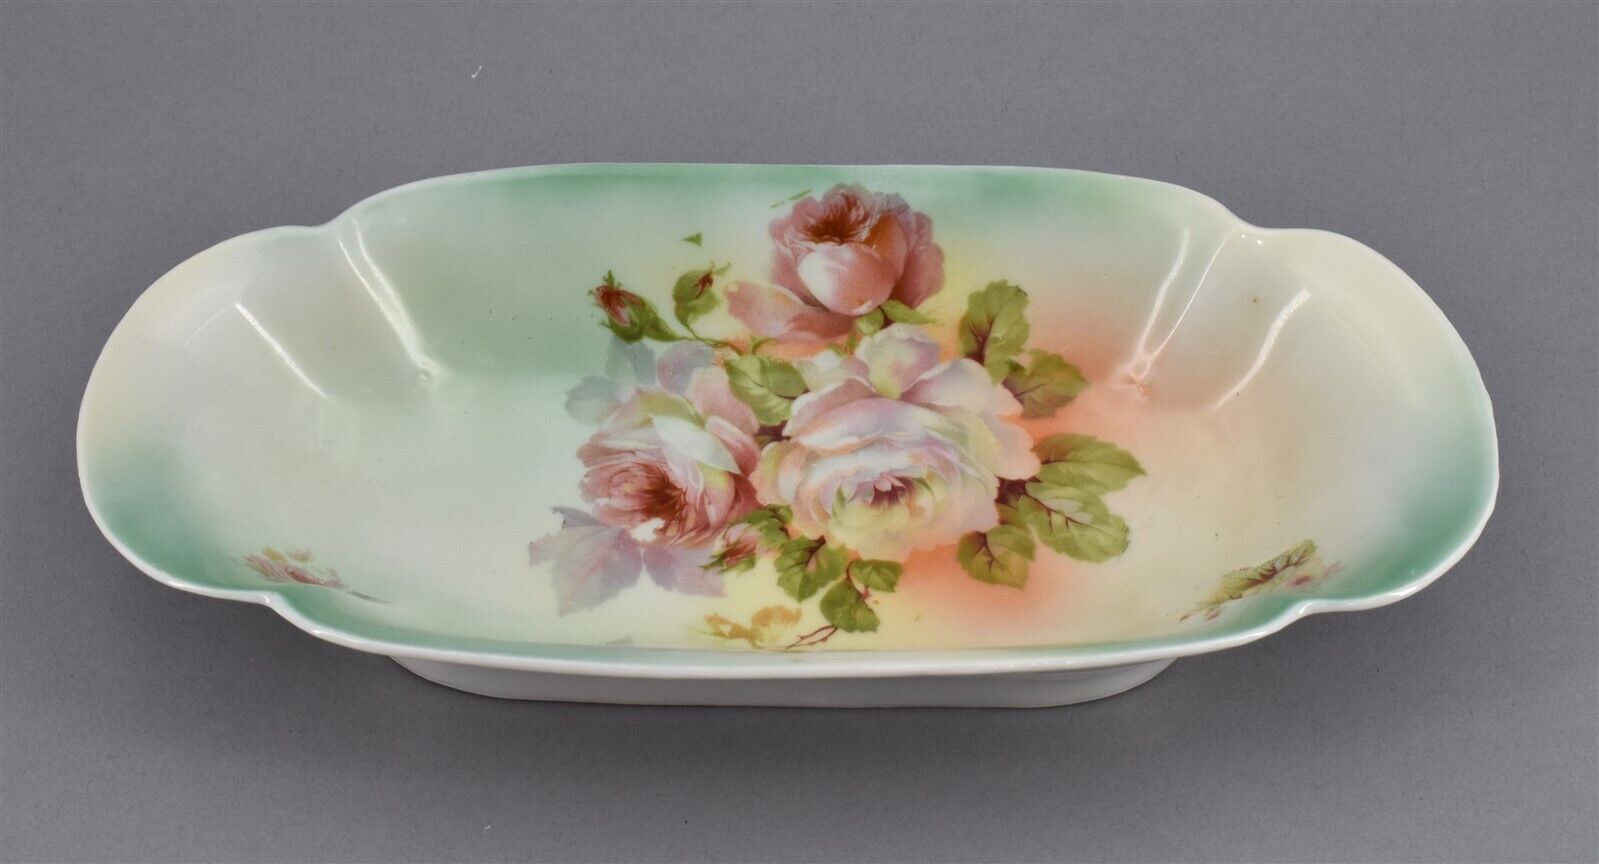 Vintage Silesia Oblong Relish or Celery Dish - Pink & White Cabbage Roses